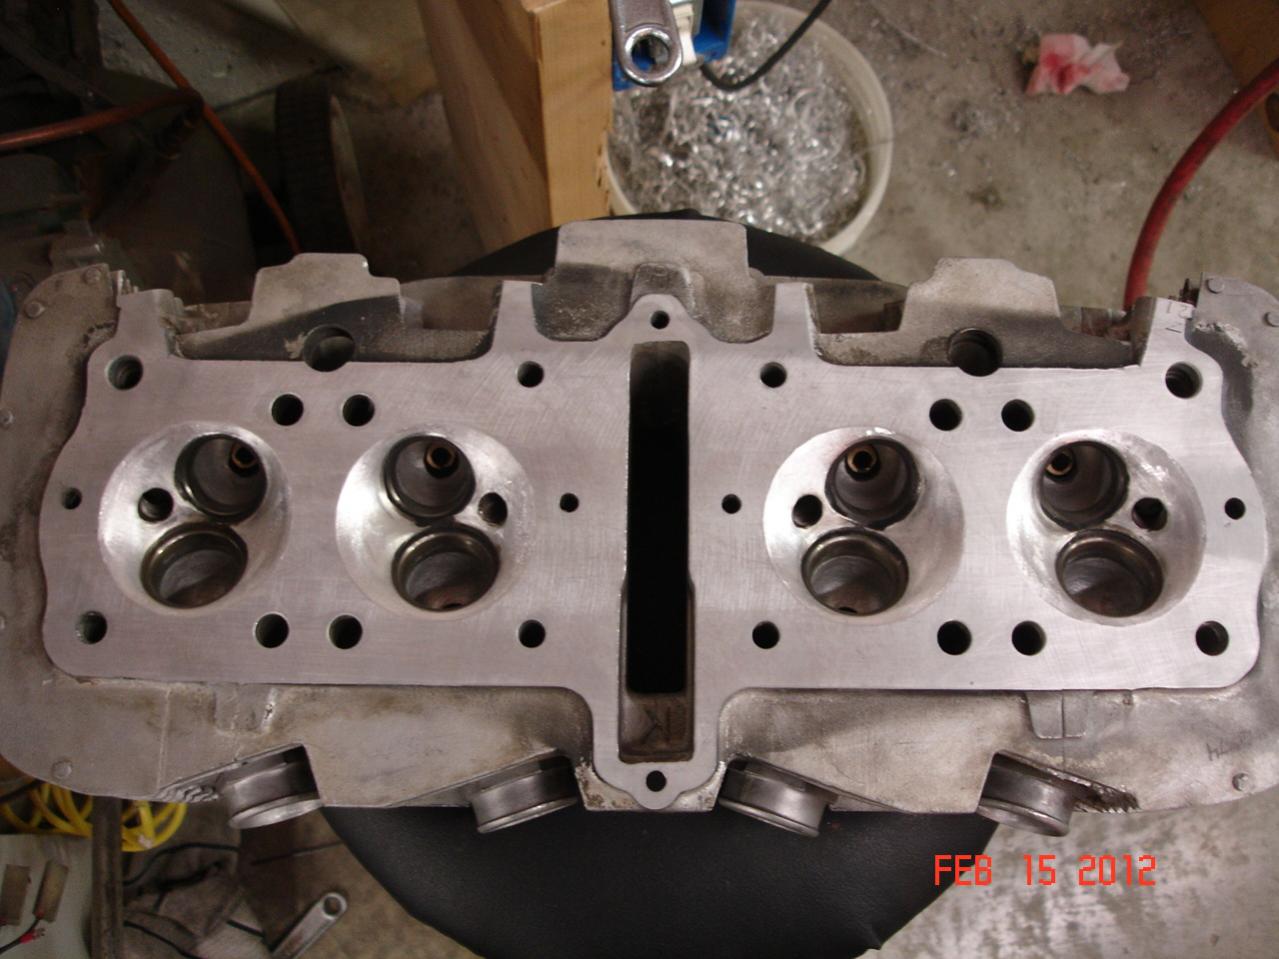 Ported head with stock size valves.  Chambers cc'ed and unshrouding done.  Machined for MLS head gasket.